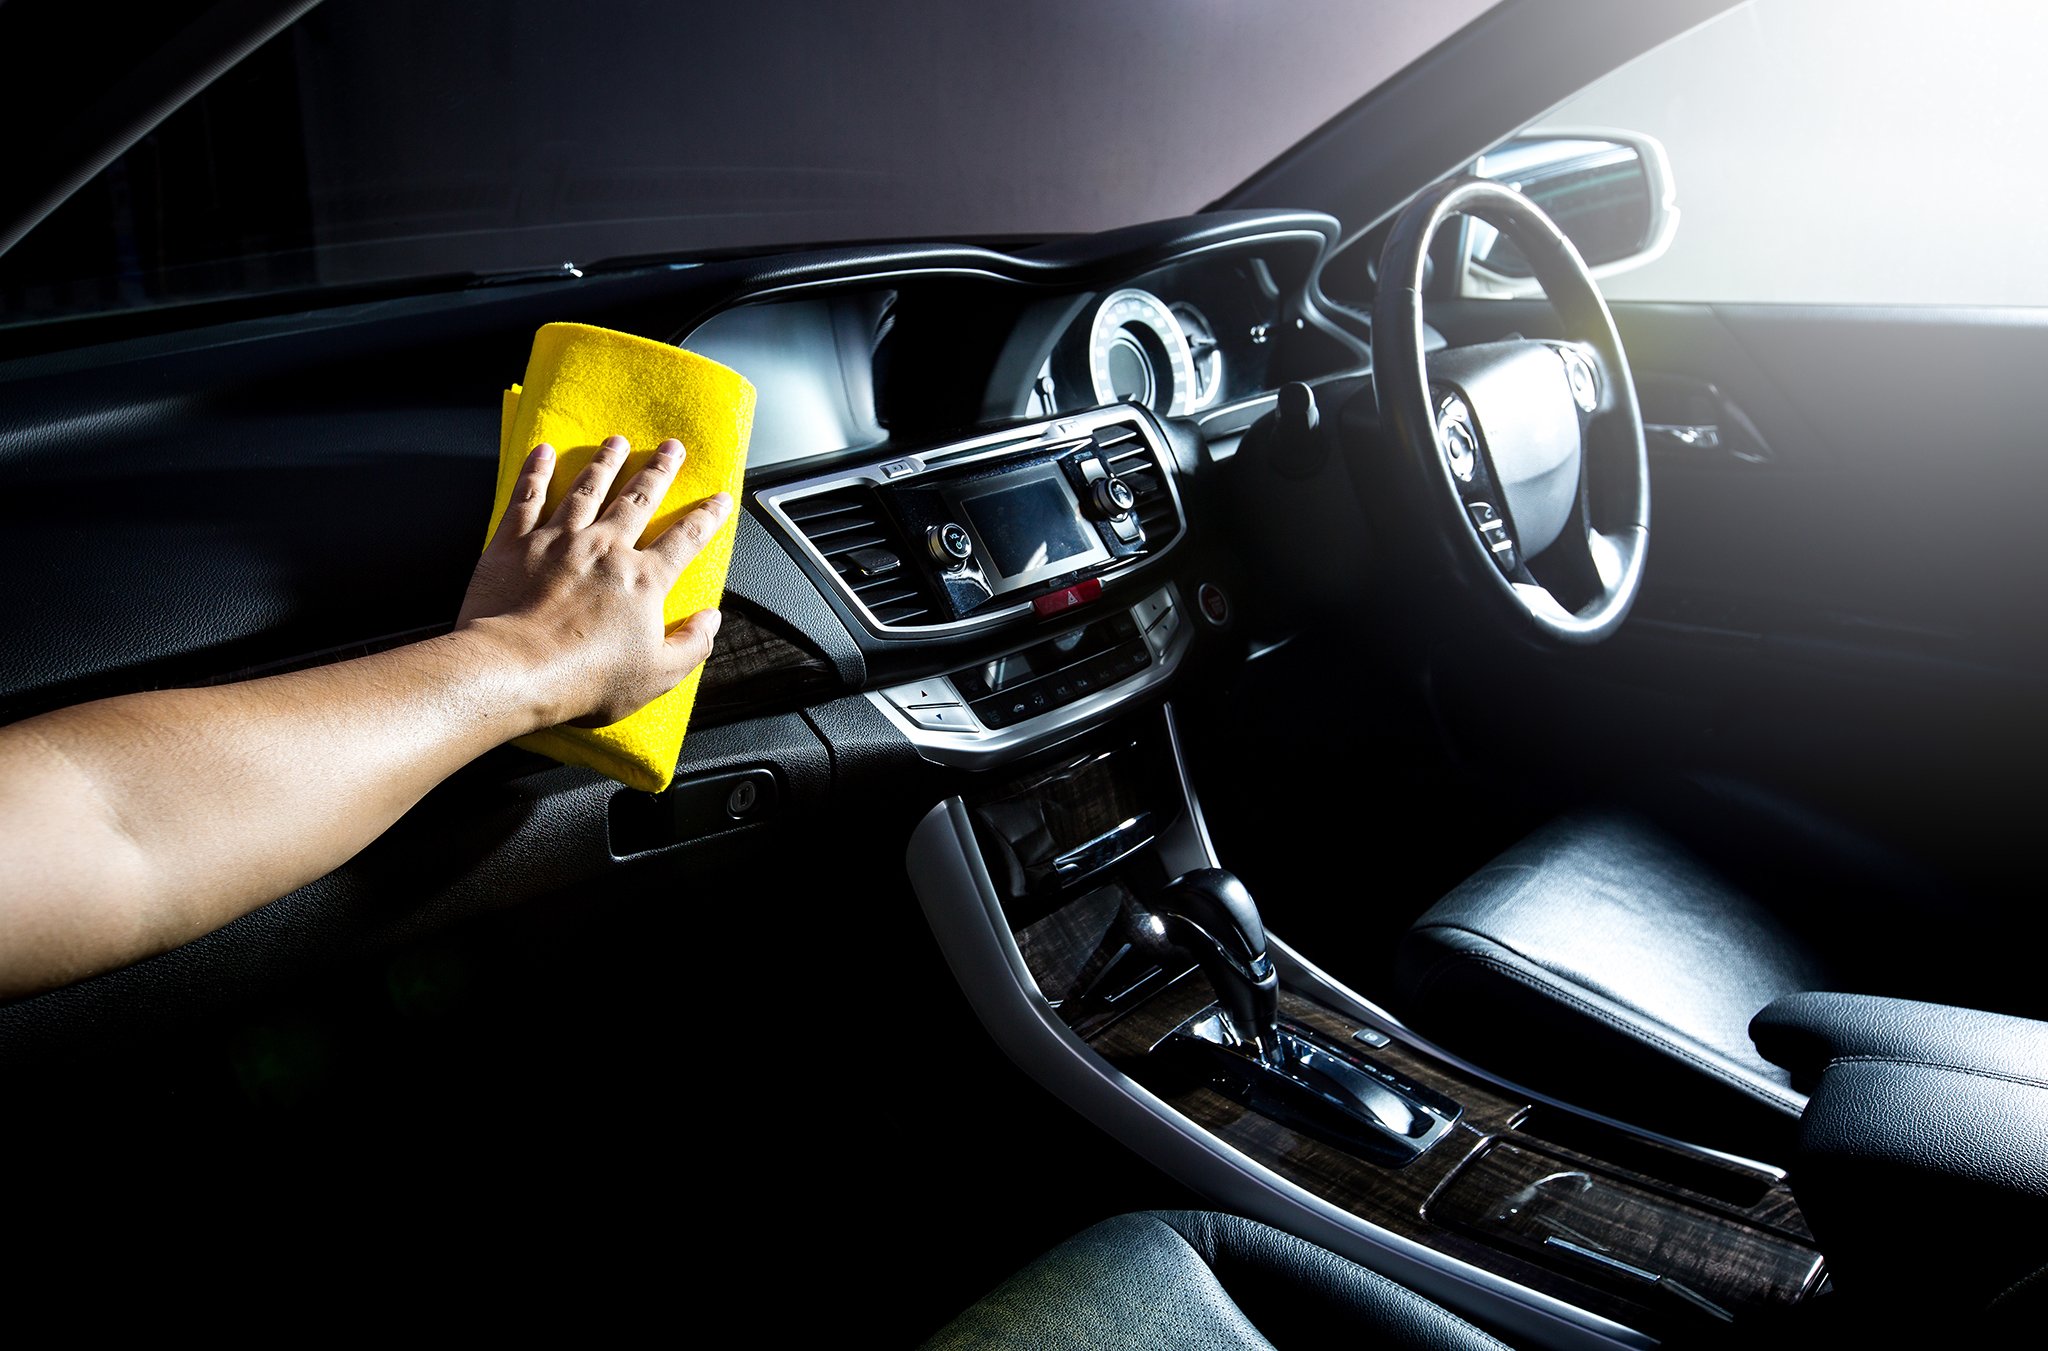 Cardiff Car Wash, Car Valet, Valeting, Detailing and Full interior service